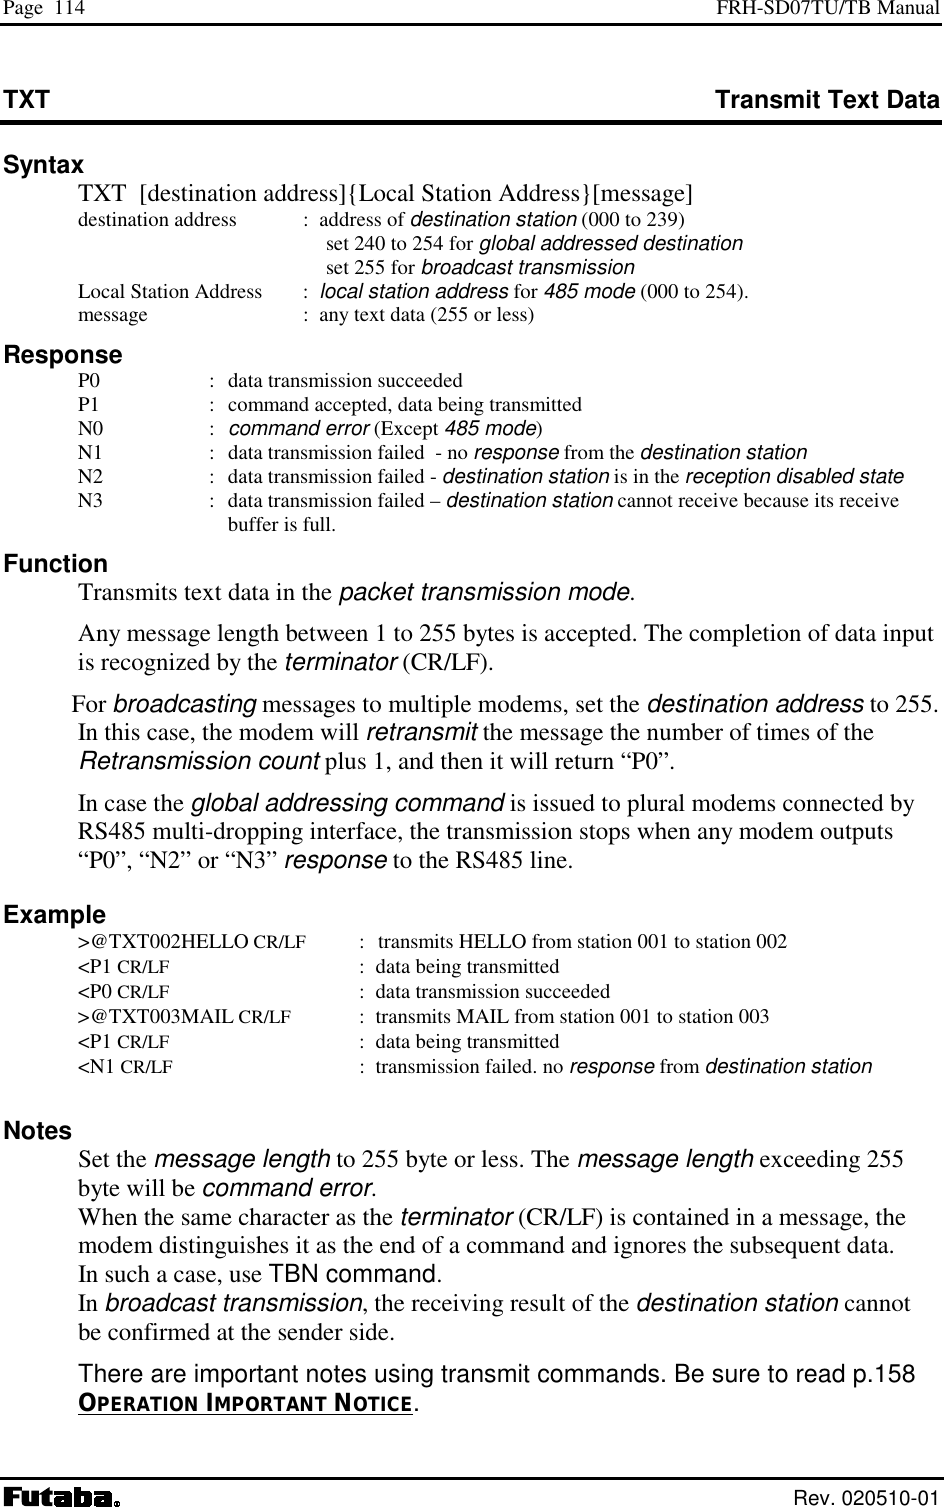 Page  114  FRH-SD07TU/TB Manual  Rev. 020510-01 TXT  Transmit Text Data Syntax   TXT  [destination address]{Local Station Address}[message]   destination address  :  address of destination station (000 to 239)     set 240 to 254 for global addressed destination    set 255 for broadcast transmission   Local Station Address     :  local station address for 485 mode (000 to 254).    message     :  any text data (255 or less) Response   P0  :  data transmission succeeded   P1  :  command accepted, data being transmitted  N0  : command error (Except 485 mode)   N1  :  data transmission failed  - no response from the destination station   N2  :  data transmission failed - destination station is in the reception disabled state   N3  :  data transmission failed – destination station cannot receive because its receive buffer is full. Function   Transmits text data in the packet transmission mode.   Any message length between 1 to 255 bytes is accepted. The completion of data input is recognized by the terminator (CR/LF).  For broadcasting messages to multiple modems, set the destination address to 255. In this case, the modem will retransmit the message the number of times of the Retransmission count plus 1, and then it will return “P0”.   In case the global addressing command is issued to plural modems connected by RS485 multi-dropping interface, the transmission stops when any modem outputs “P0”, “N2” or “N3” response to the RS485 line. Example  &gt;@TXT002HELLO CR/LF :    transmits HELLO from station 001 to station 002  &lt;P1 CR/LF  :  data being transmitted  &lt;P0 CR/LF :  data transmission succeeded  &gt;@TXT003MAIL CR/LF  :  transmits MAIL from station 001 to station 003  &lt;P1 CR/LF  :  data being transmitted  &lt;N1 CR/LF :  transmission failed. no response from destination station  Notes  Set the message length to 255 byte or less. The message length exceeding 255 byte will be command error. When the same character as the terminator (CR/LF) is contained in a message, the modem distinguishes it as the end of a command and ignores the subsequent data.  In such a case, use TBN command.  In broadcast transmission, the receiving result of the destination station cannot be confirmed at the sender side.  There are important notes using transmit commands. Be sure to read p.158 OPERATION IMPORTANT NOTICE. 